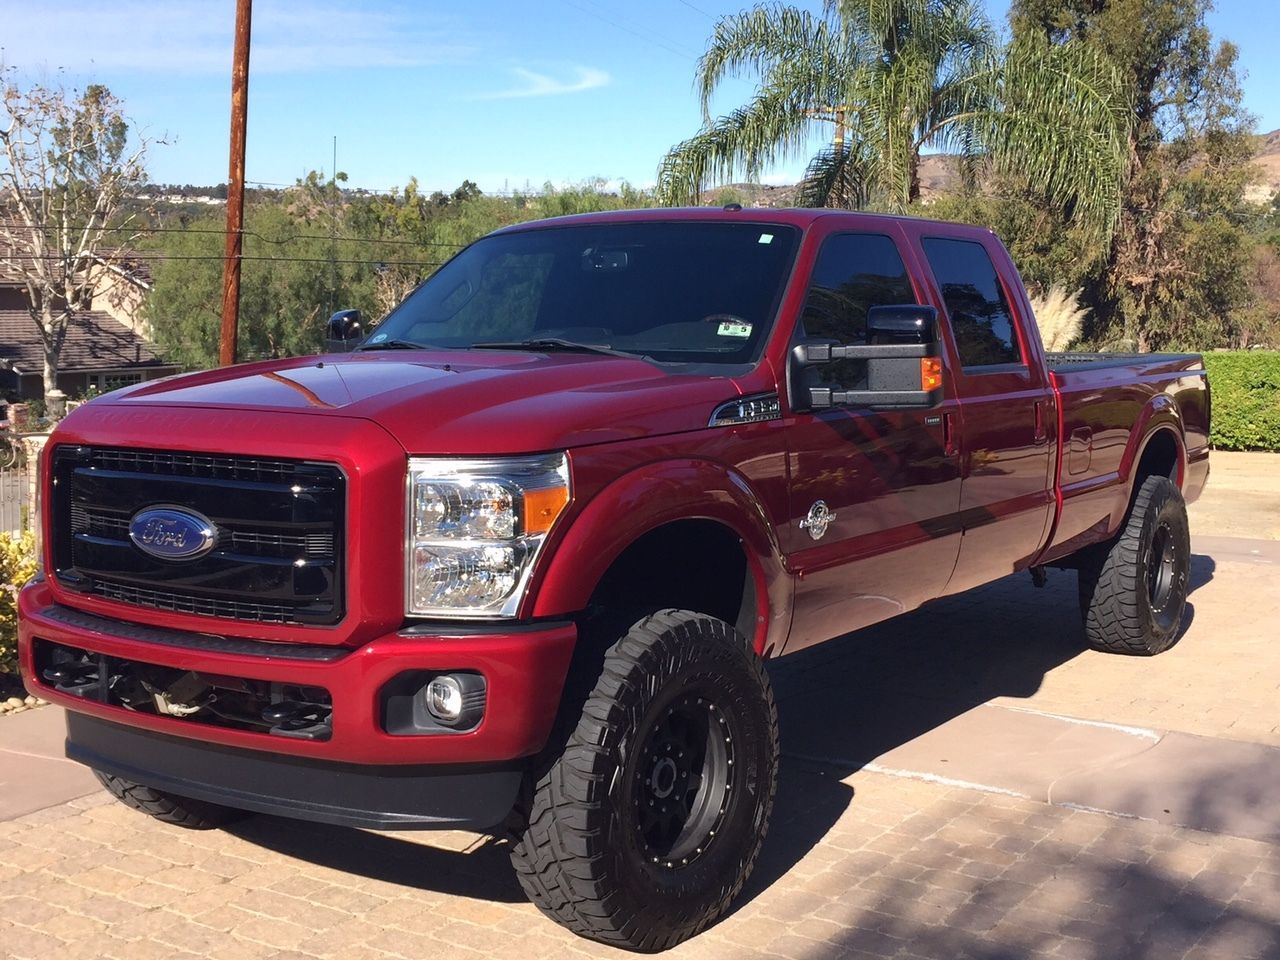 2014 Ford F 350 Super Duty Platinum Lifted for sale in 2023 | Lifted trucks  for sale, Lifted ford trucks, Ford